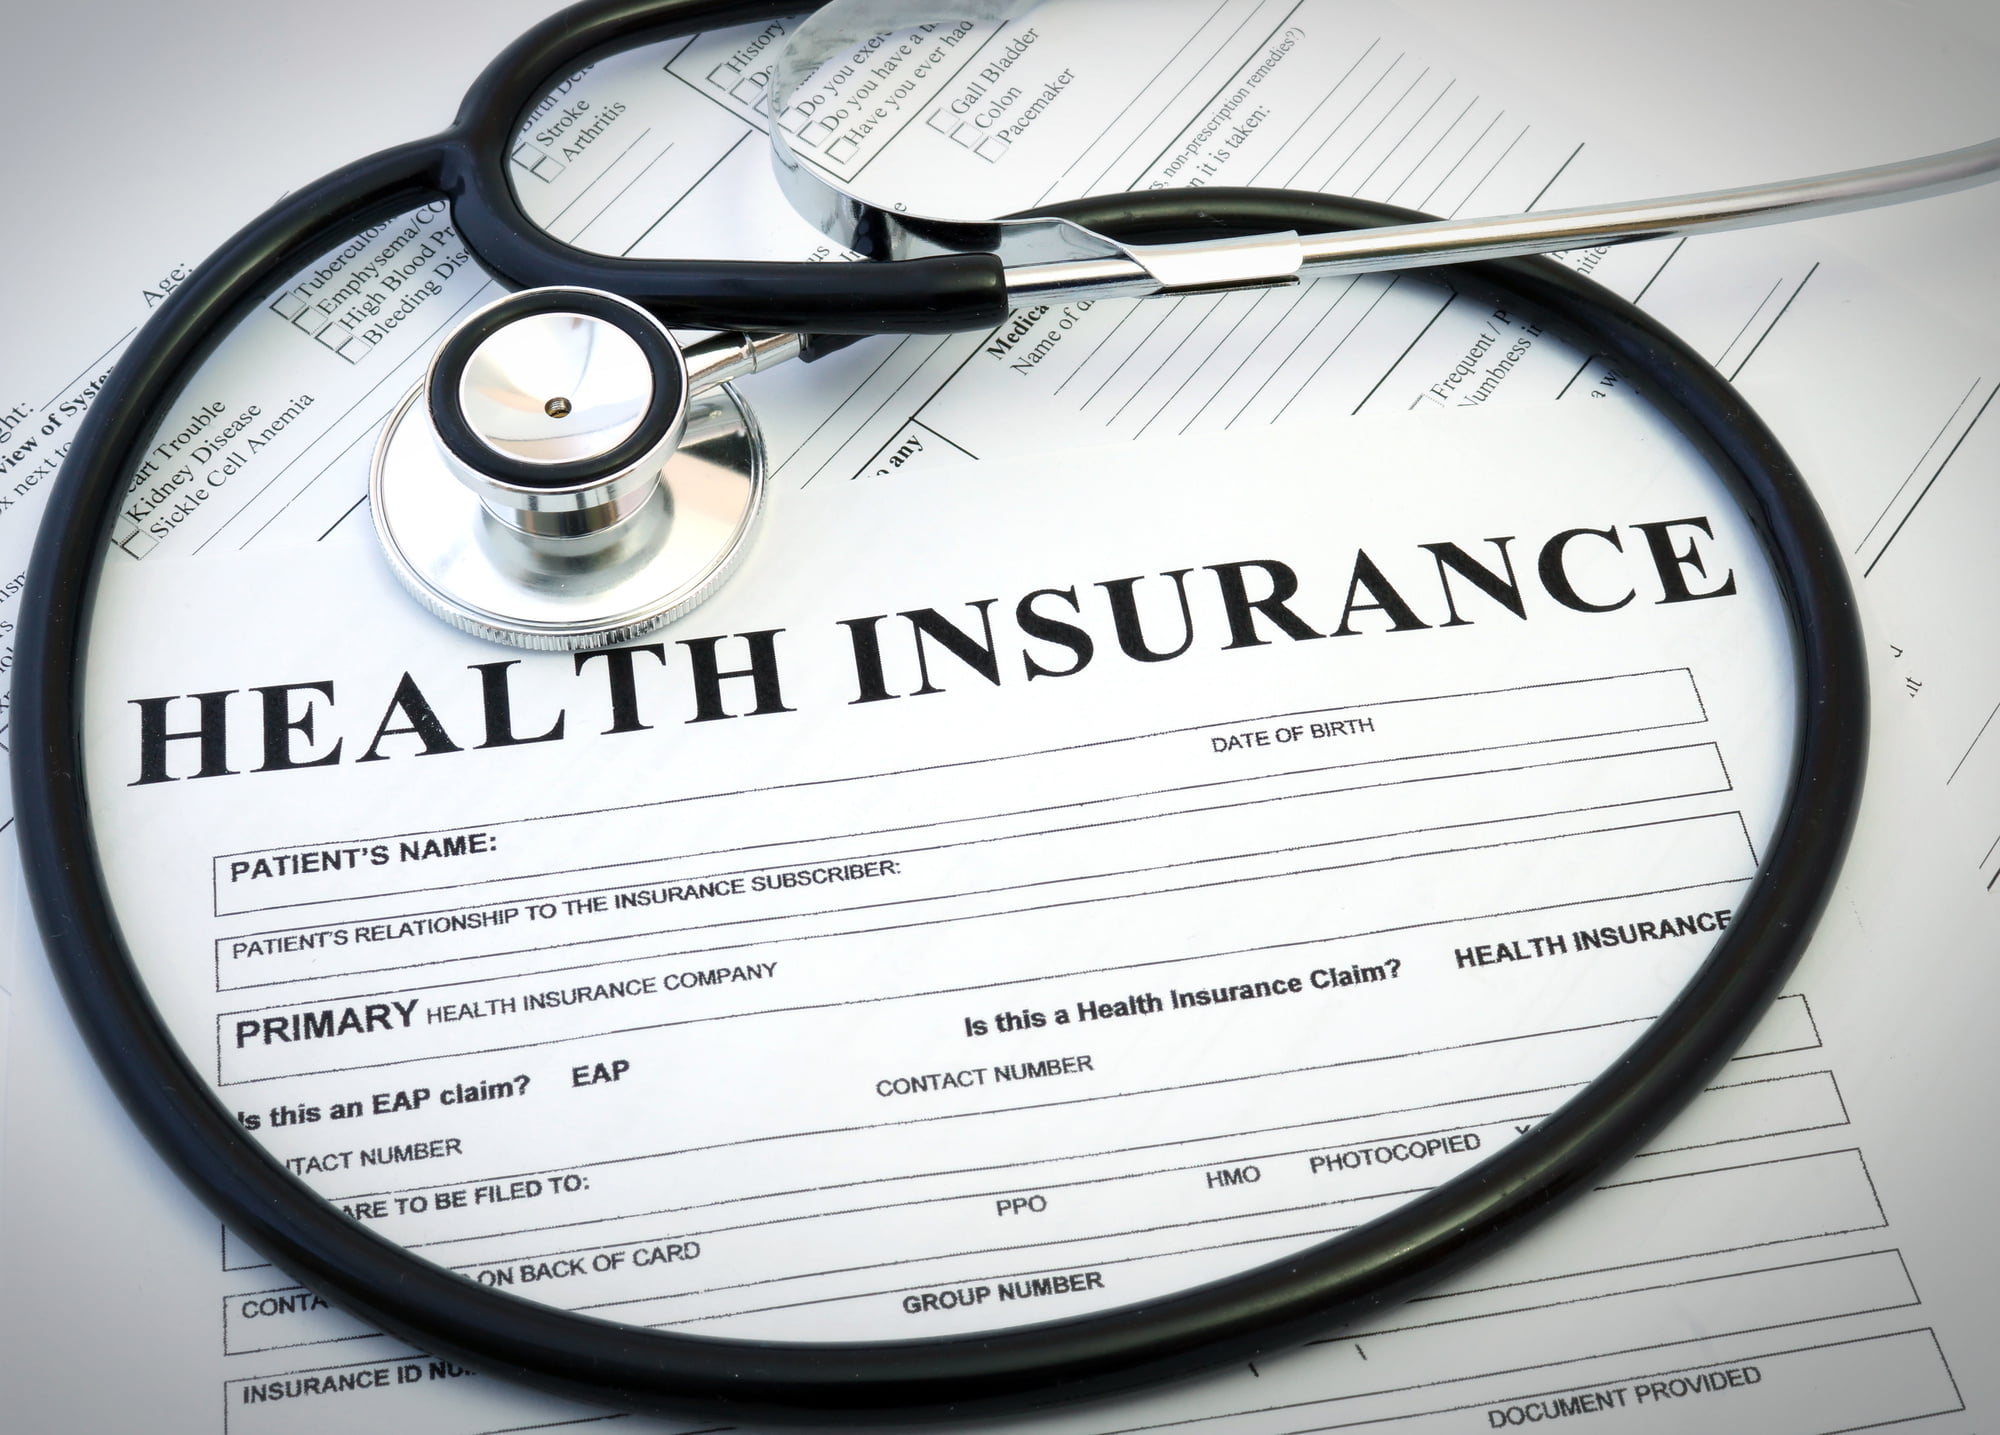 HMO vs PPO health insurance: How much do you know about the differences between the two? Read on to learn more about the differences between them.